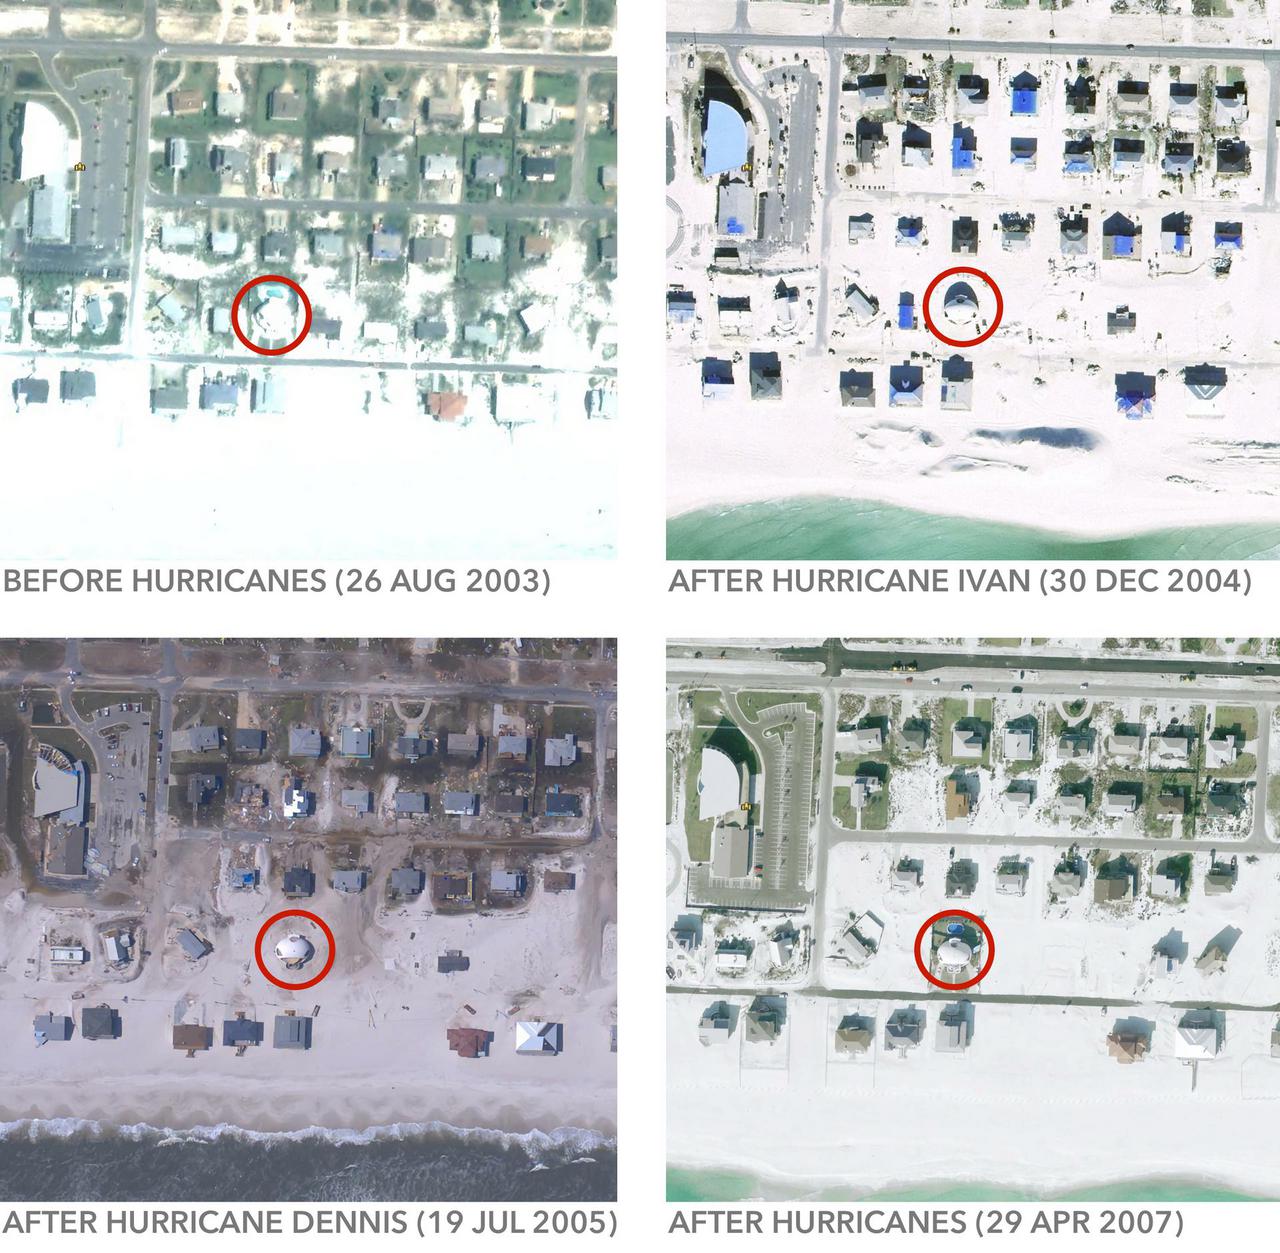 Satellite images of hurricane damage around Dome of a Home.